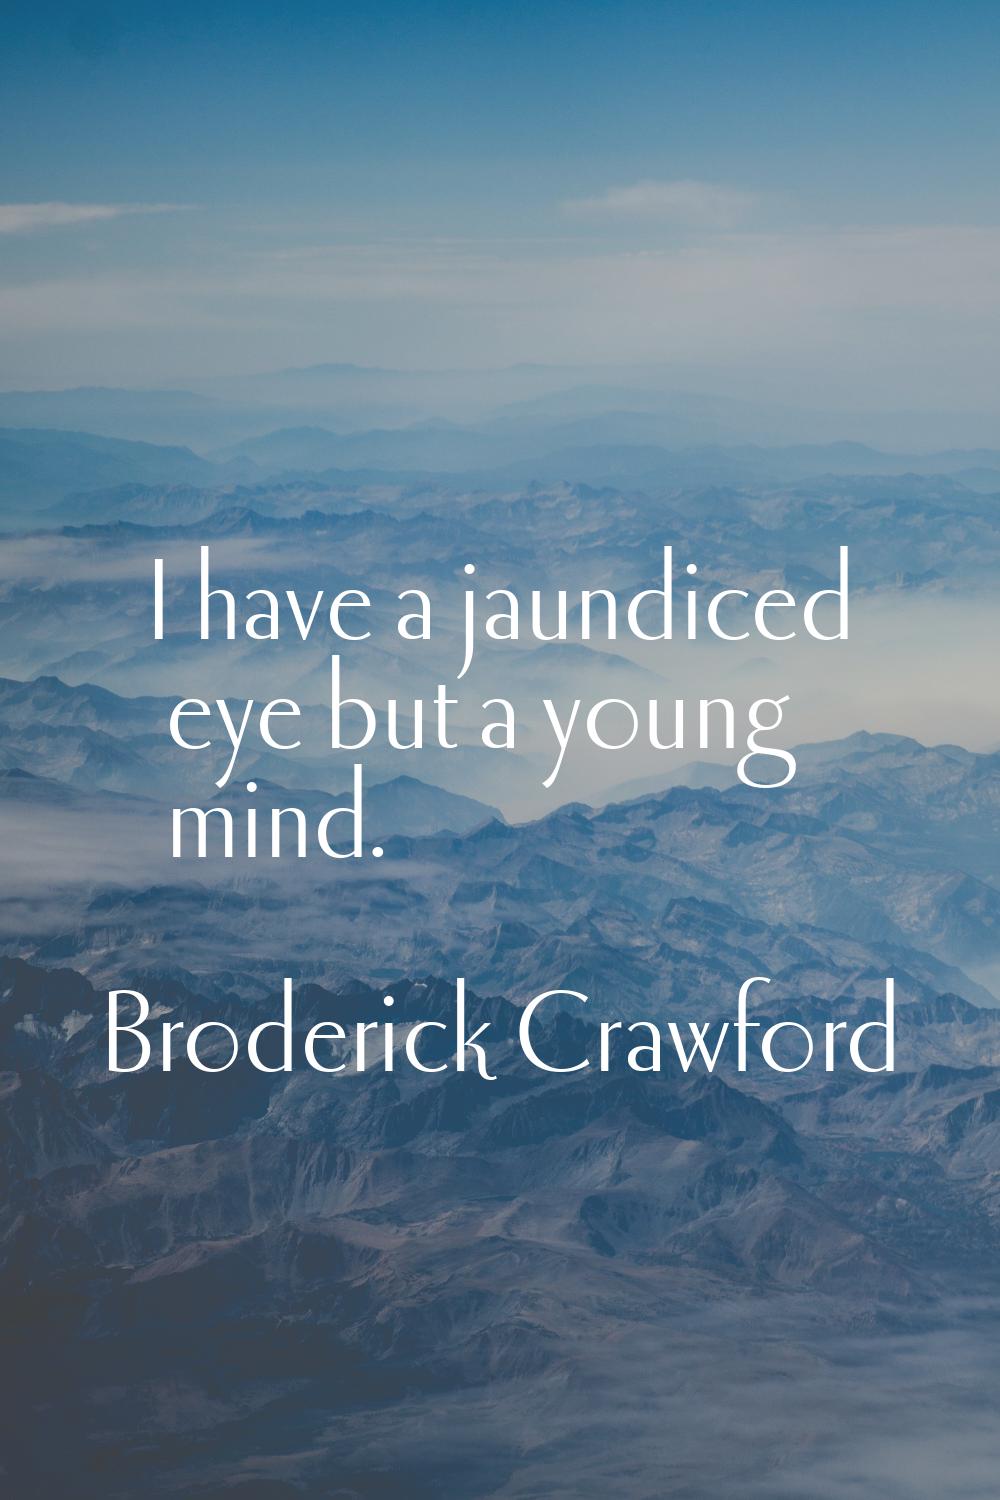 I have a jaundiced eye but a young mind.